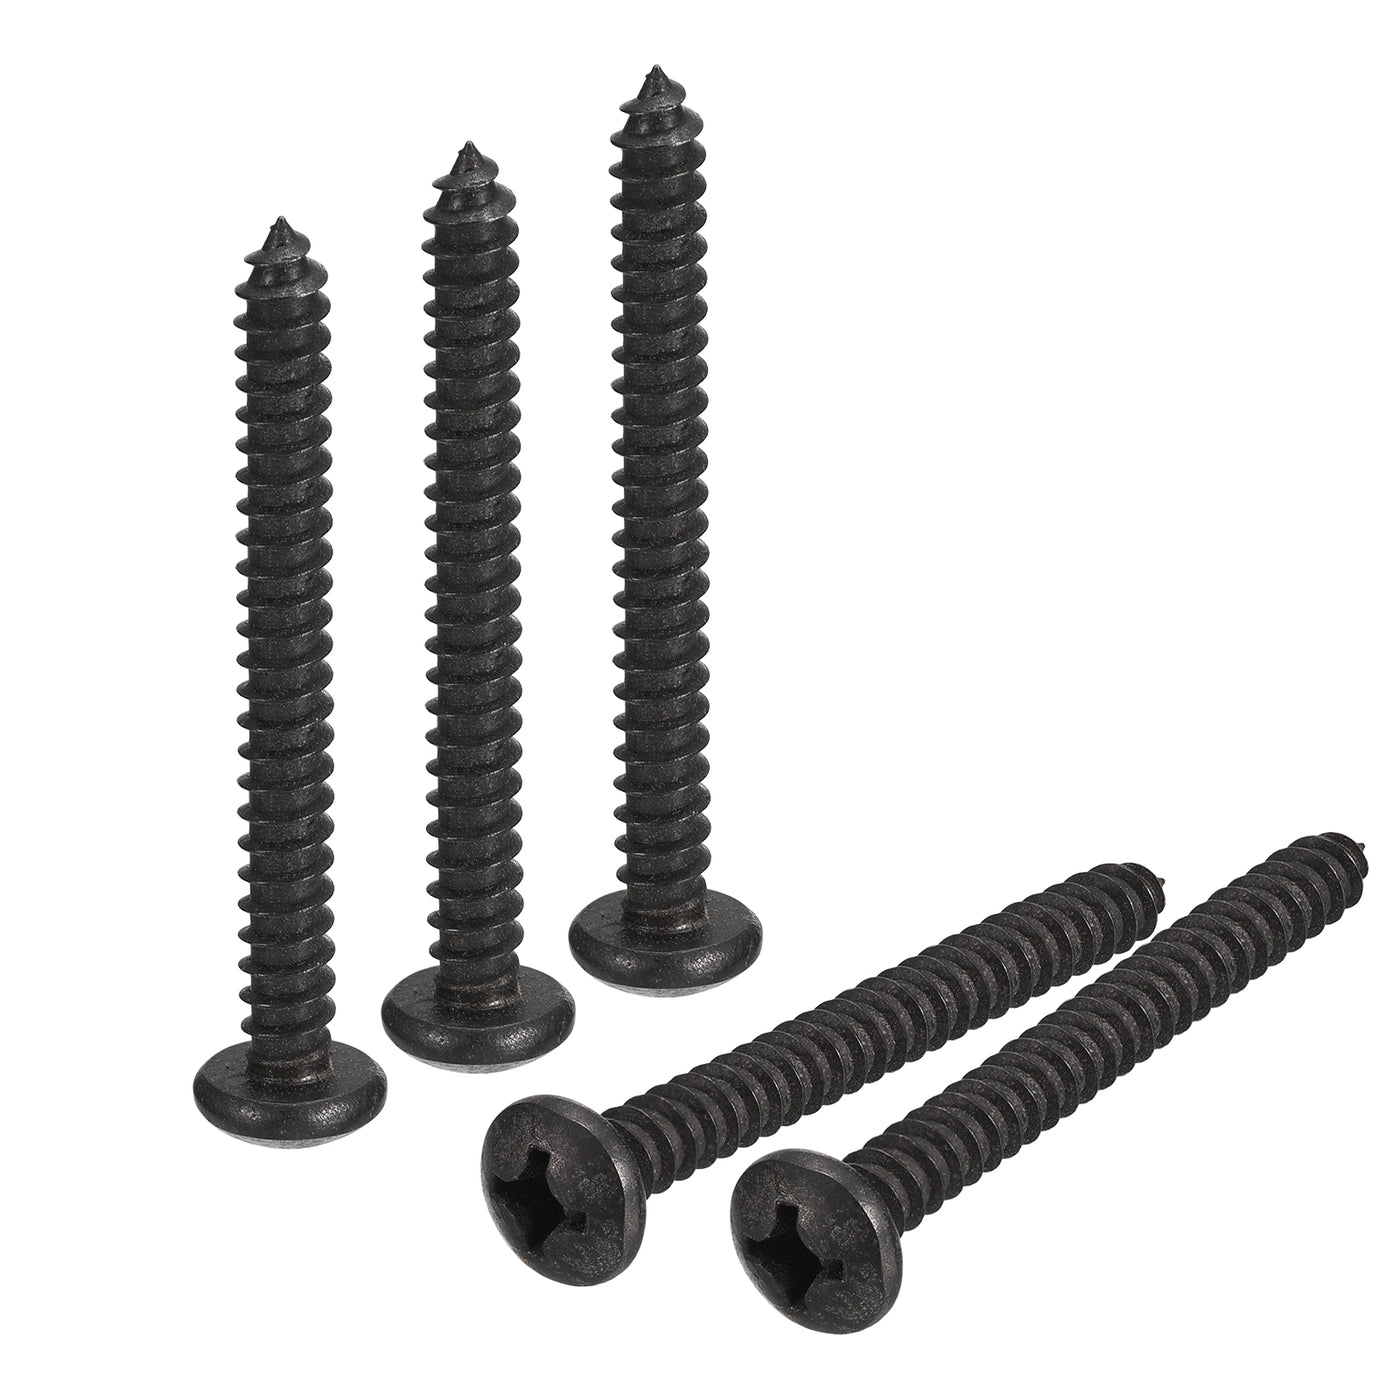 uxcell Uxcell 1/4 x 2" Phillips Pan Head Self-tapping Screw, 25pcs - 304 Stainless Steel Round Head Wood Screw Full Thread (Black)